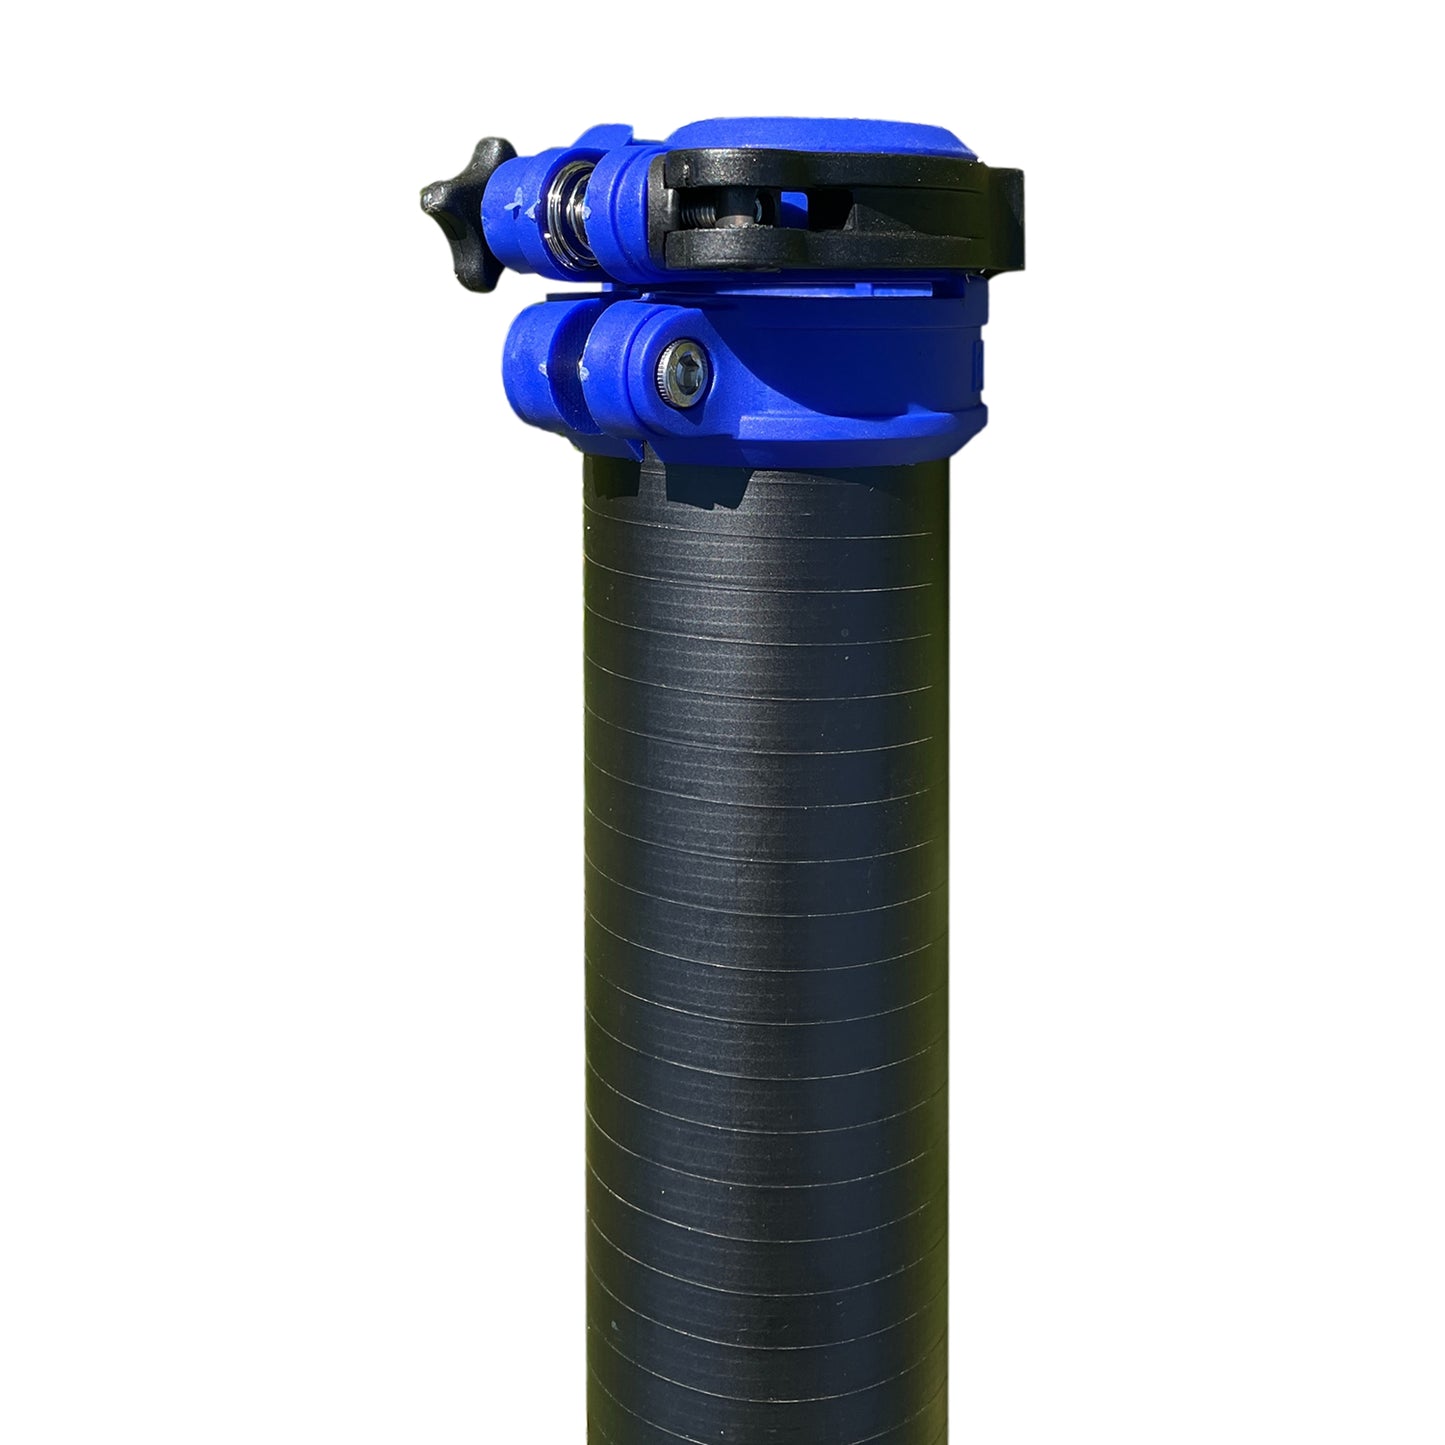 Carbon Clamping Poles 40 Foot (3 Story) Kit with Nozzle and Adaptor Accessories